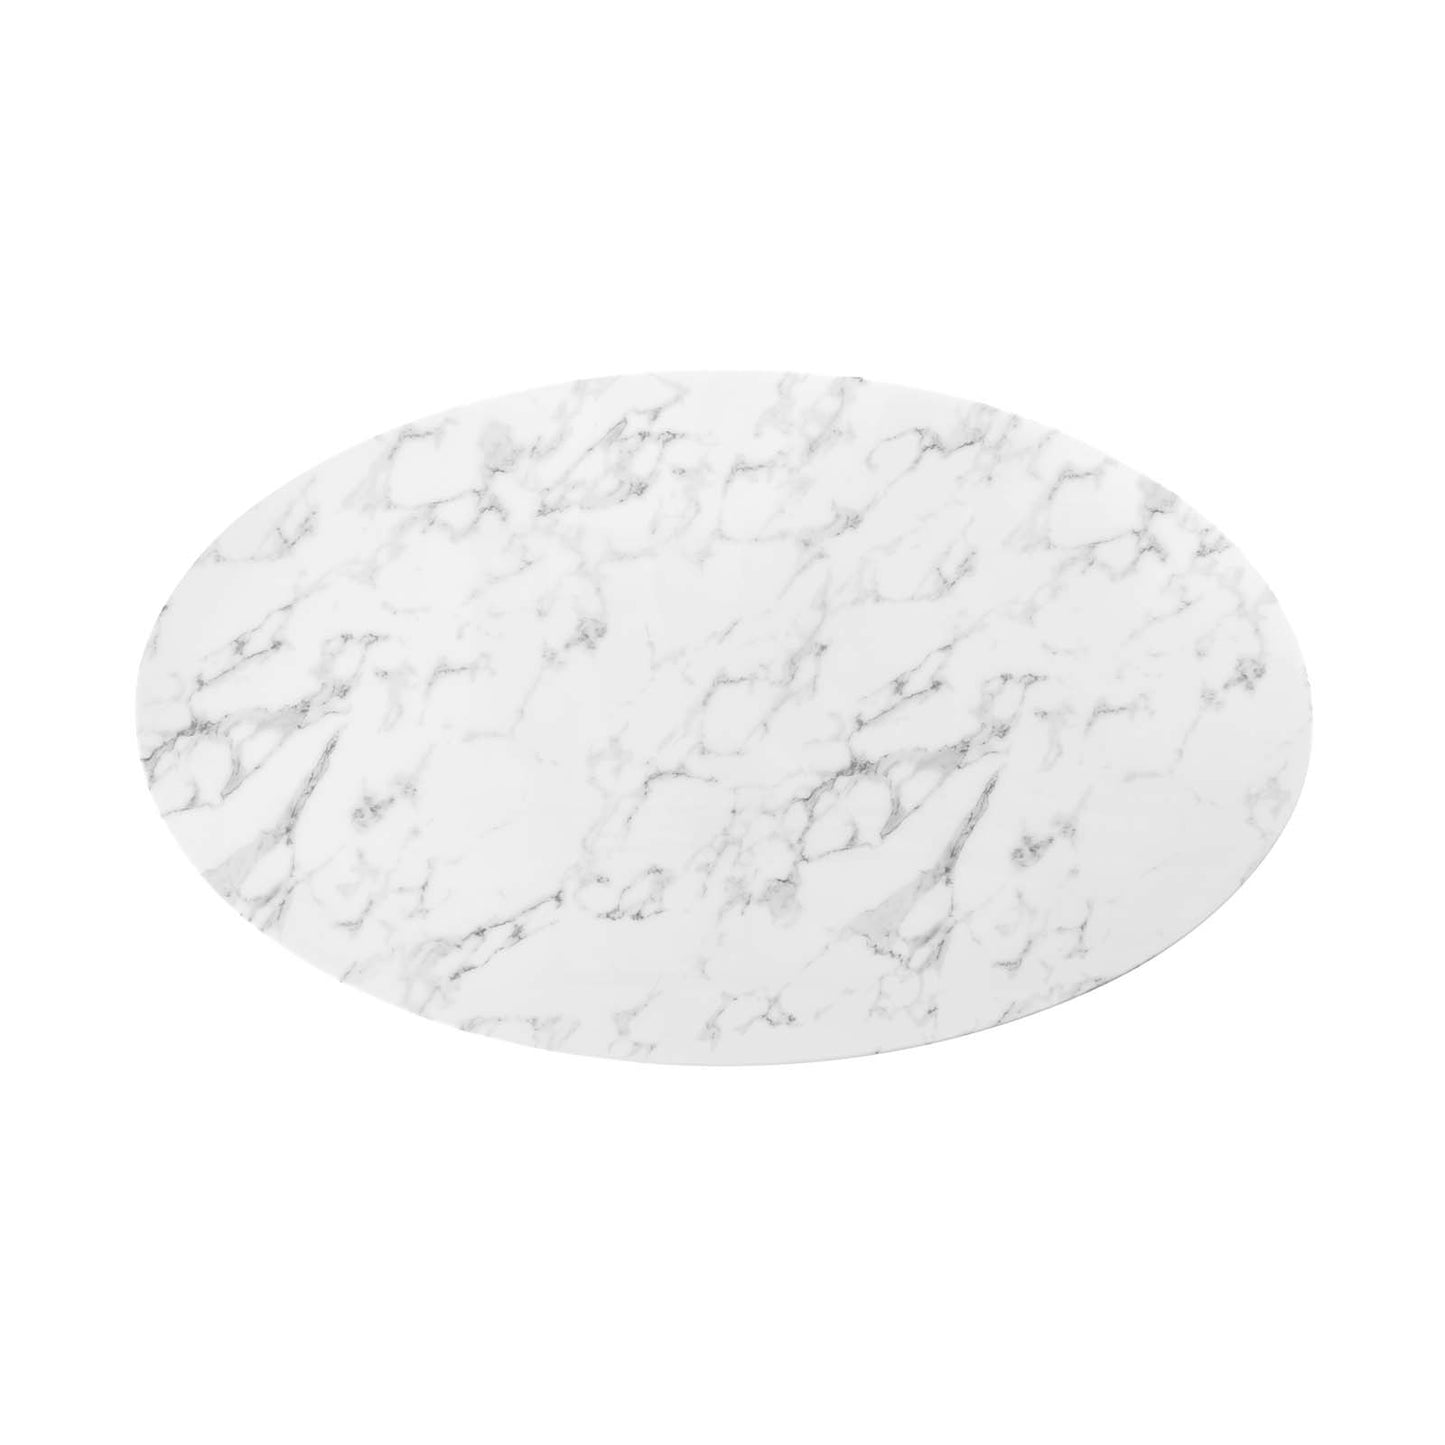 Modway Lippa 60" Oval Artificial Marble Dining Table in White - EEI-1135